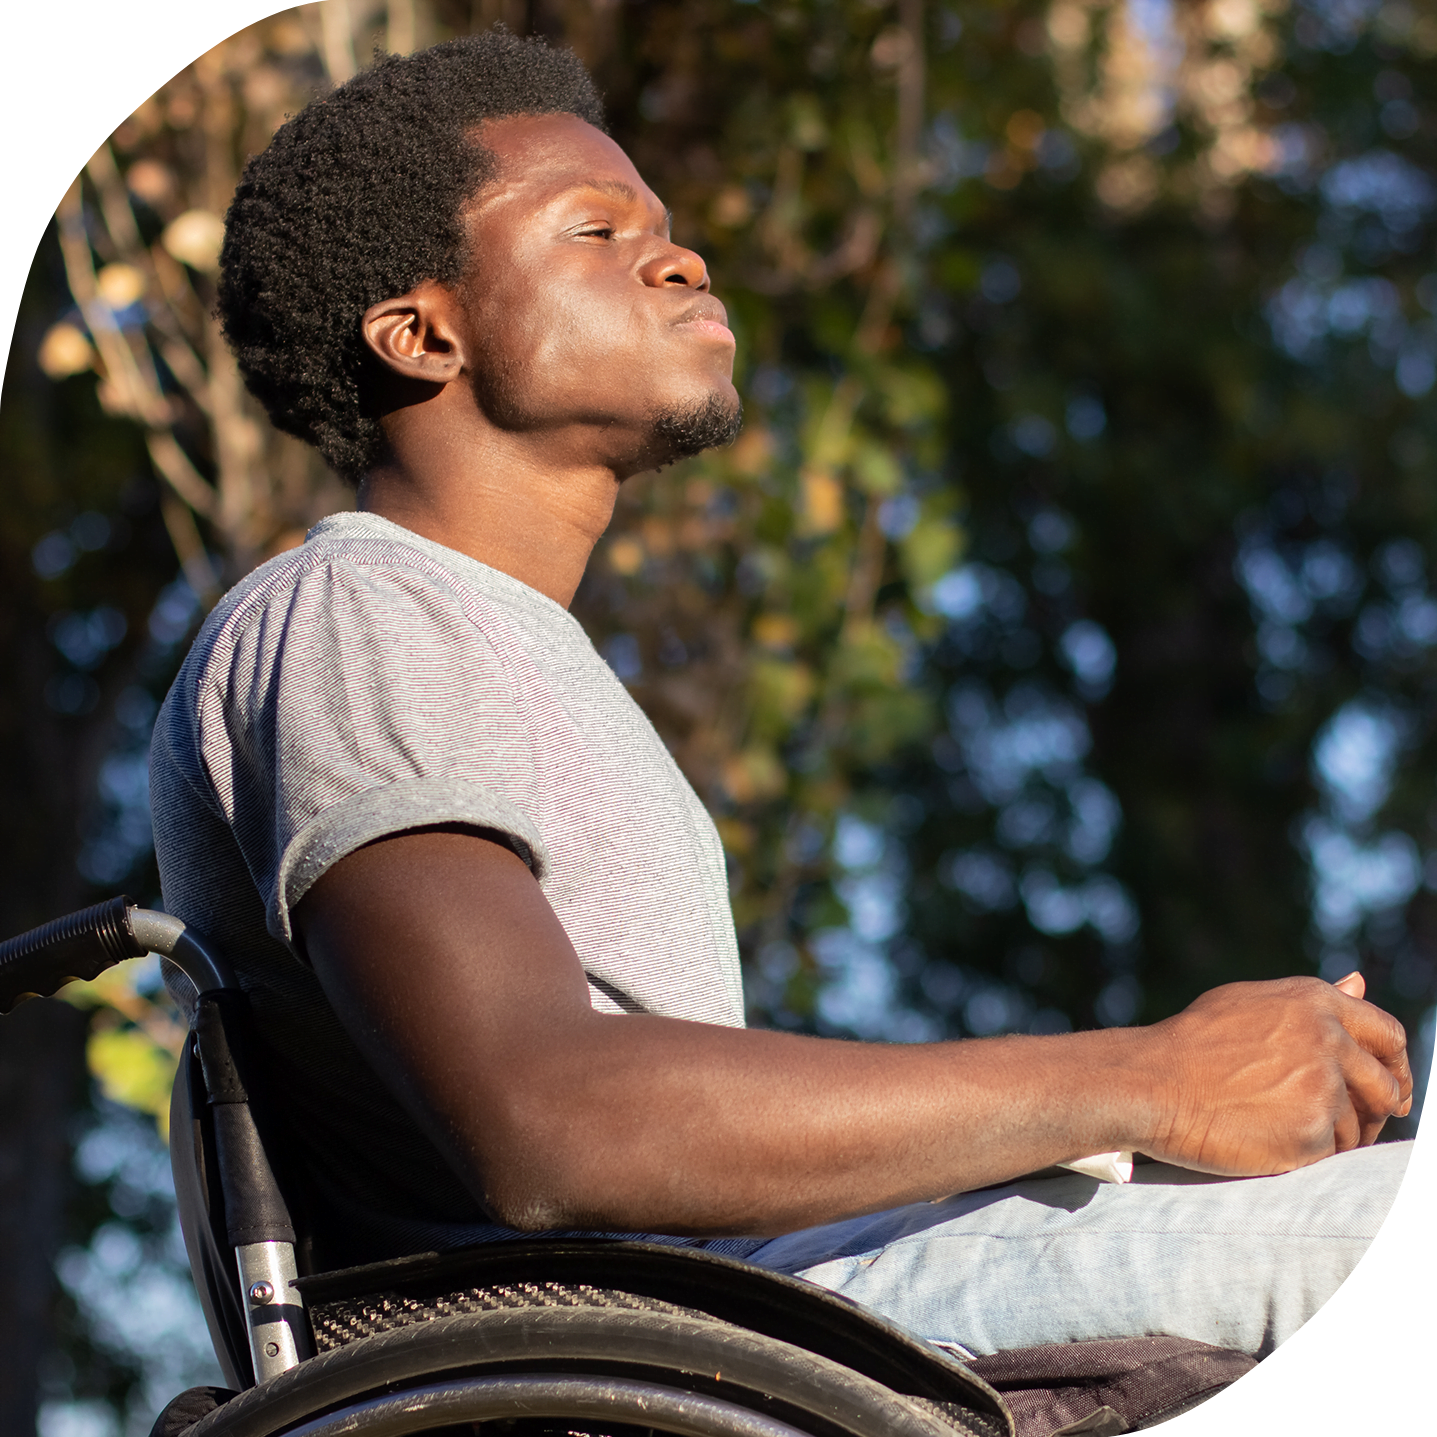 A young Black man in a wheelchair, outside on a sunny day.